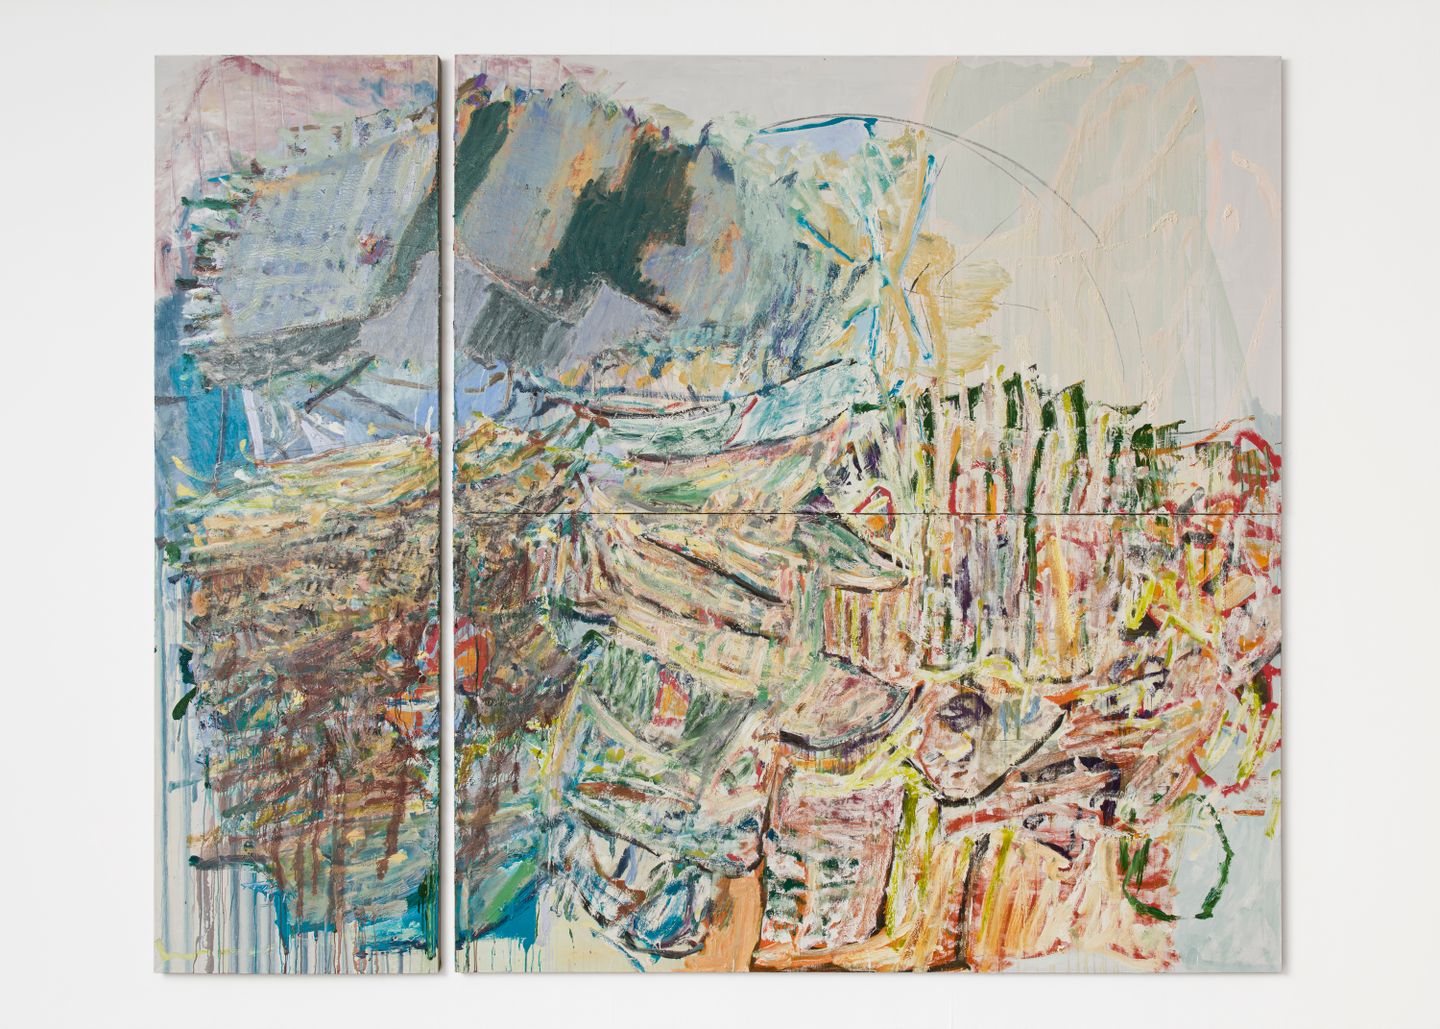 Pam Evelyn, Promised Land (2022). Oil on linen. Triptych. Overall dimensions: 320 x 390 cm; Left panel: 320 x 100 cm; Right panels (each): 160 x 290 cm. Courtesy the artist and The Approach. Photo: Michael Brzezinski.